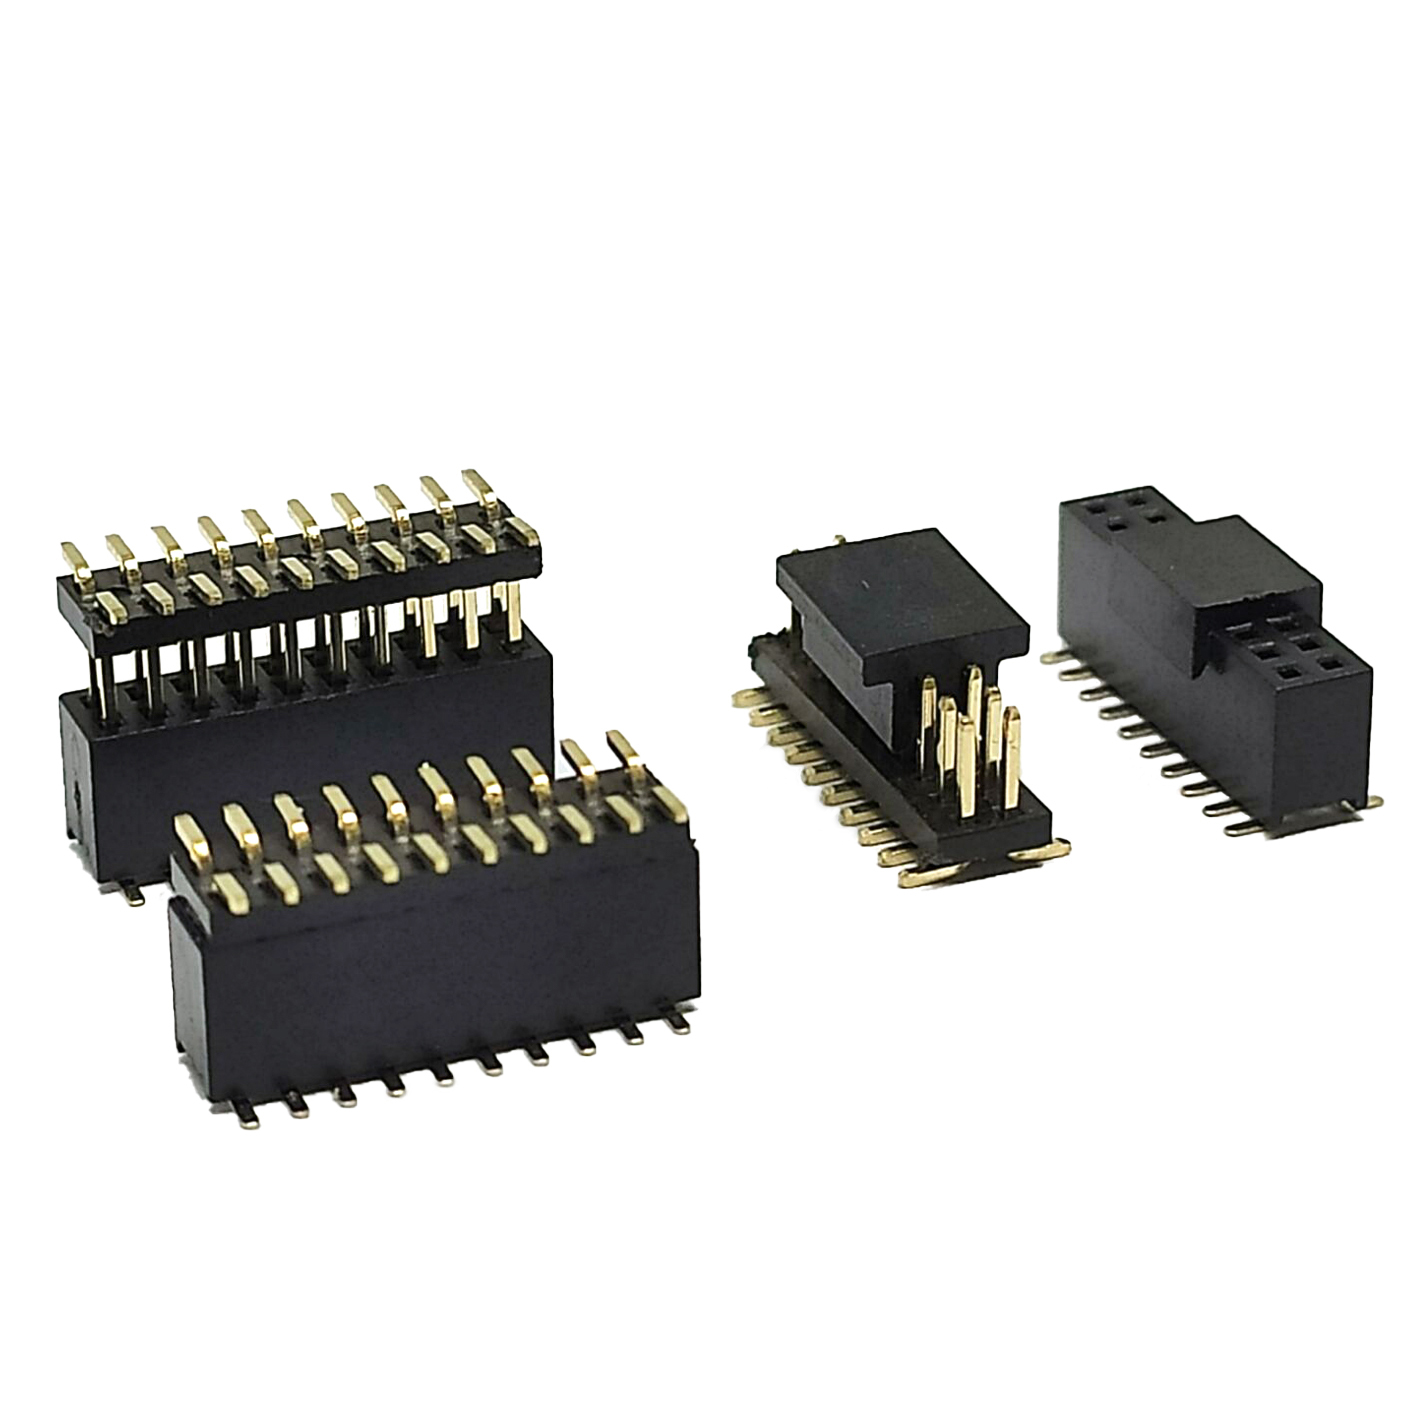 The 20021121-00020T1LF Connector Header, featuring 20 positions at a 1.27mm pitch, is your answer to compact, secure, and efficient surface mount technology connectivity. 